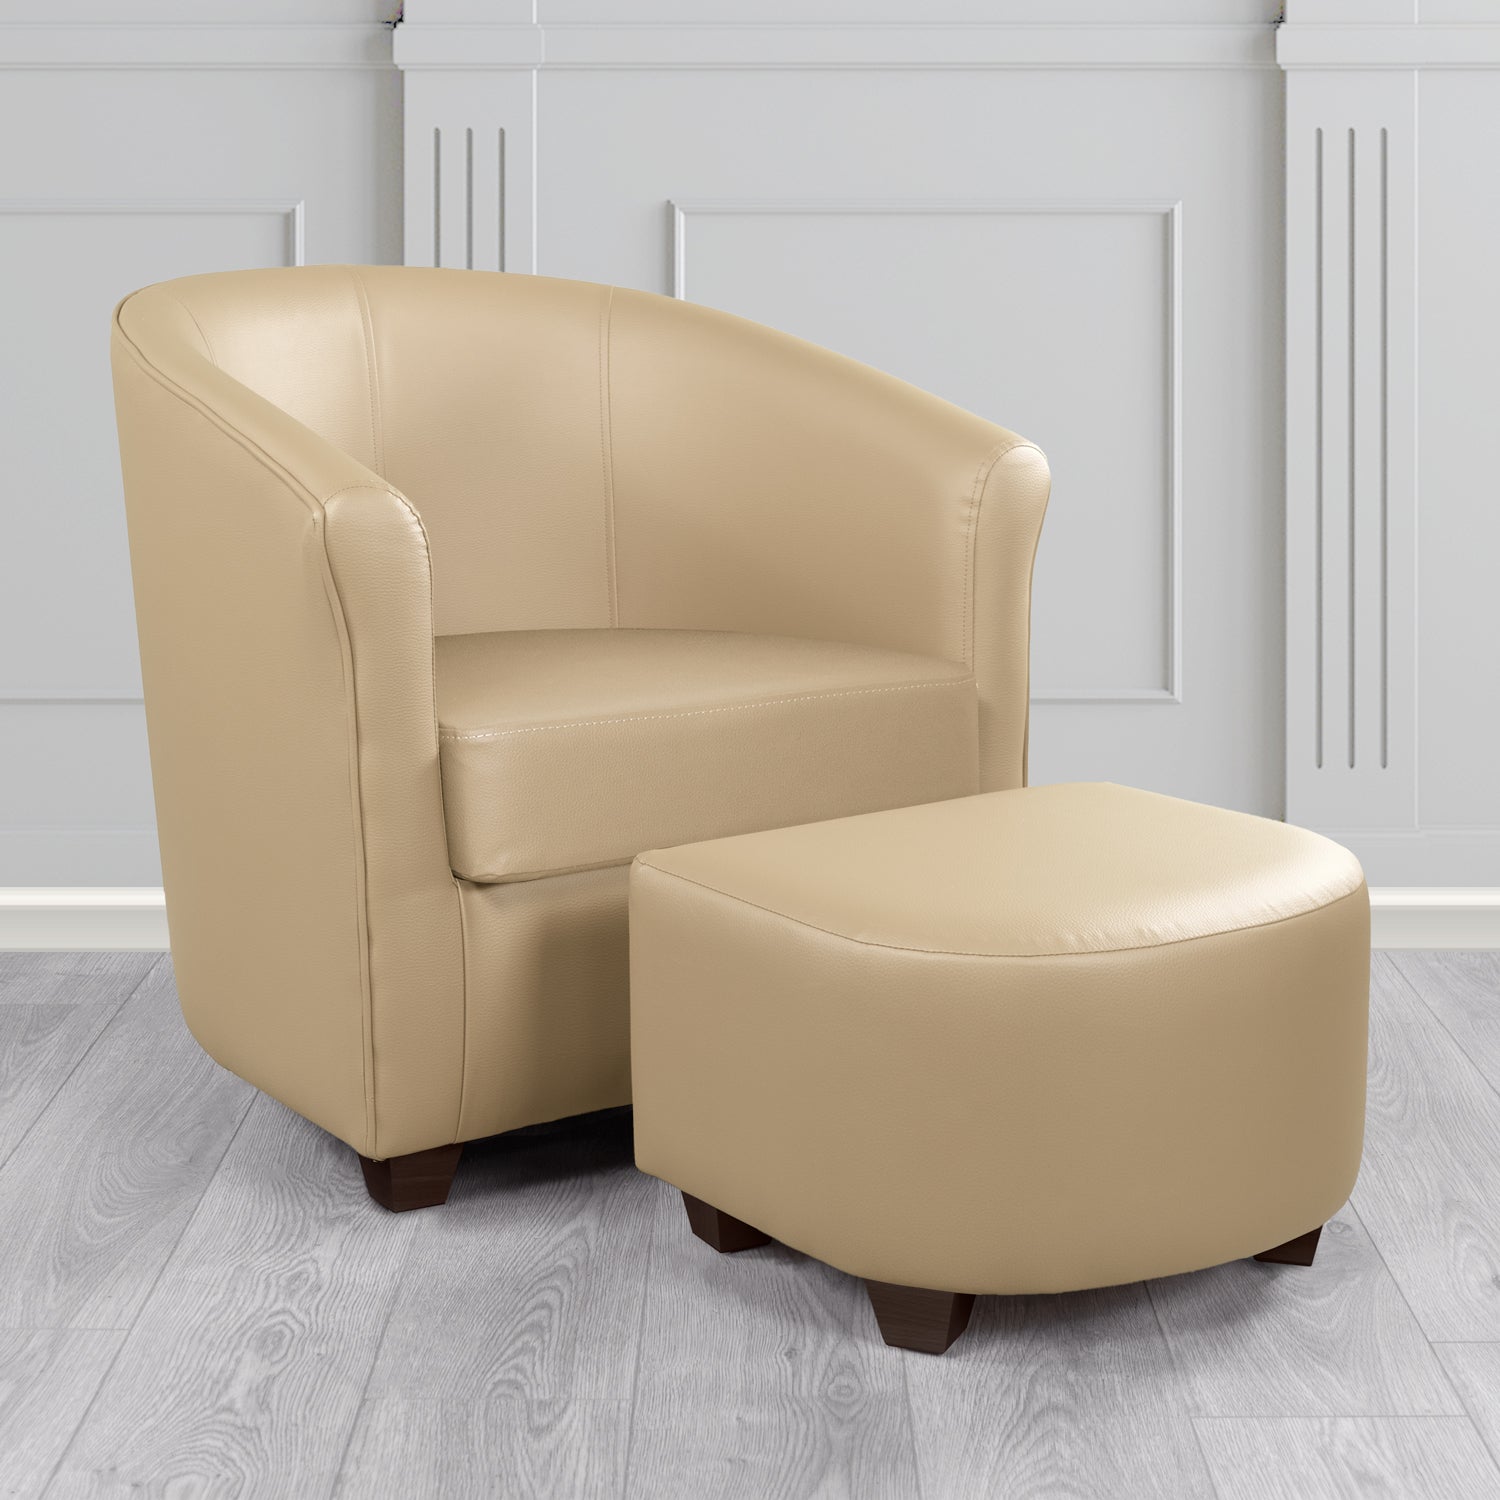 Cannes Tub Chair with Footstool Set in Just Colour Almond Crib 5 Faux Leather - The Tub Chair Shop